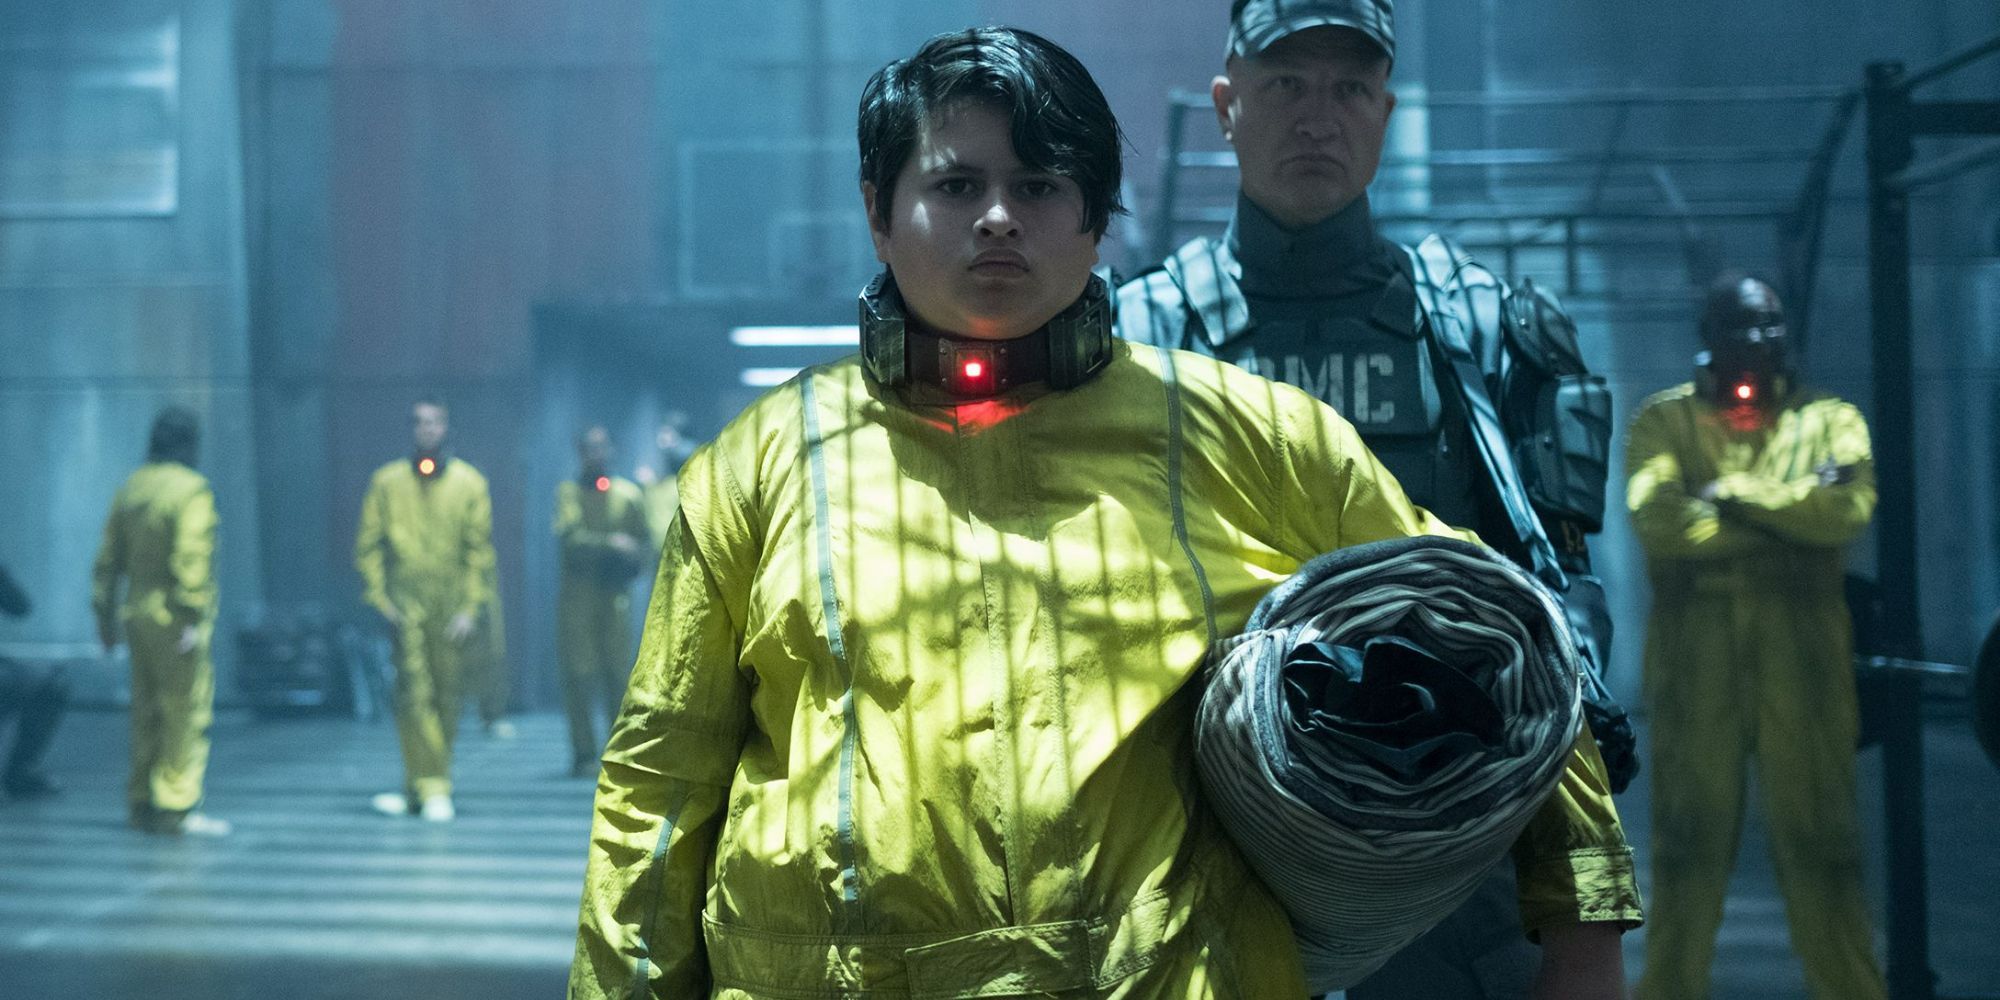 Firefist from Deadpool 2 in a prison jumpsuit and collar